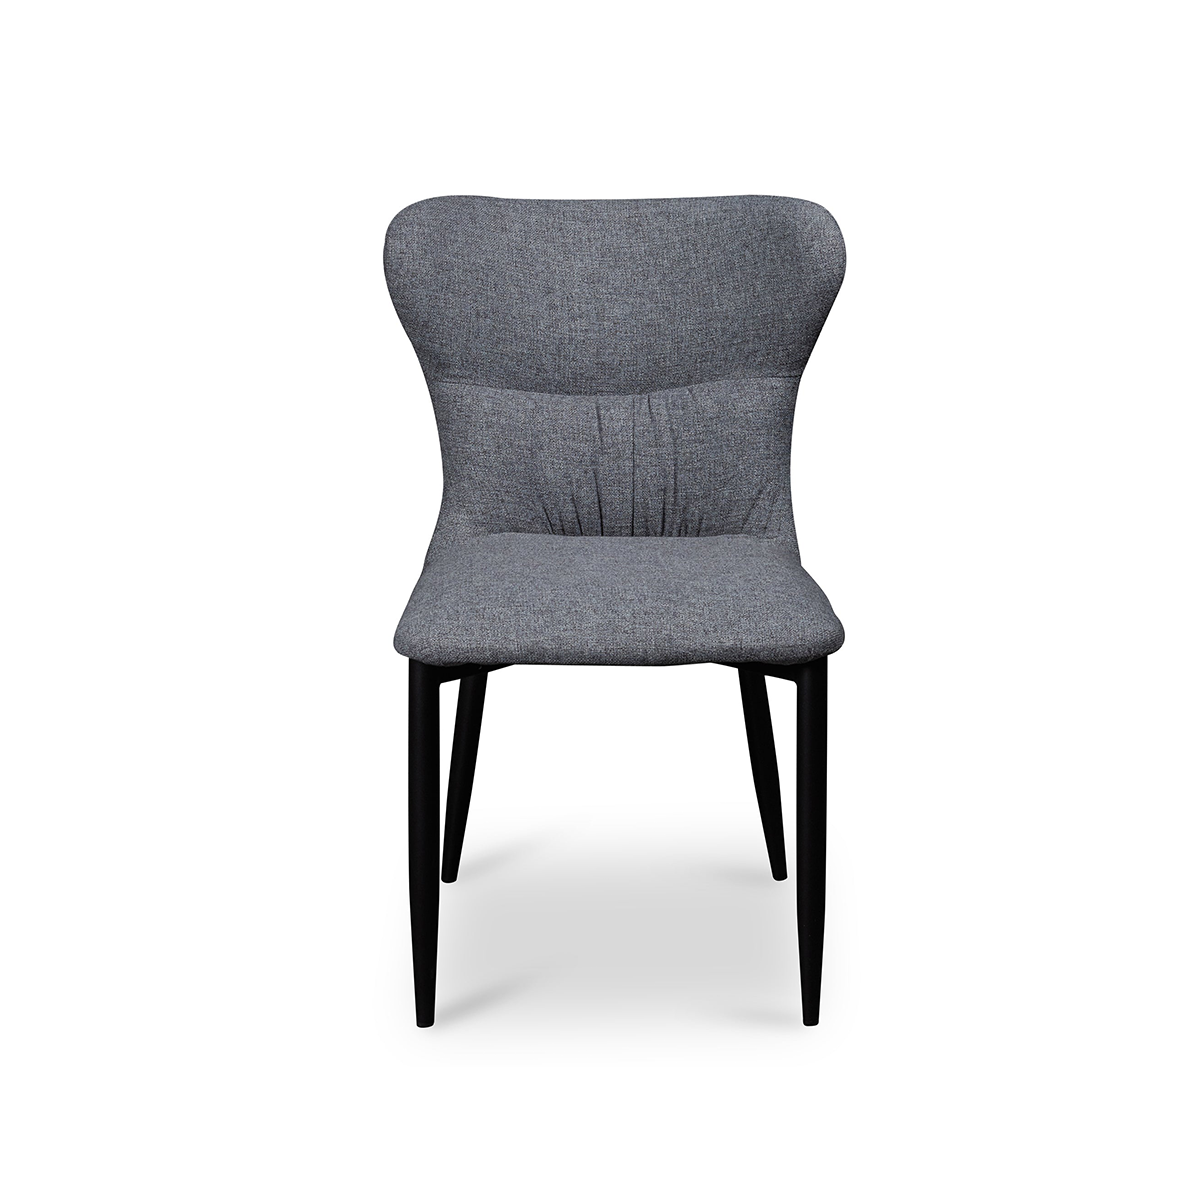 FondHouse Rze Pebble Grey with Black Legs Dining Chair